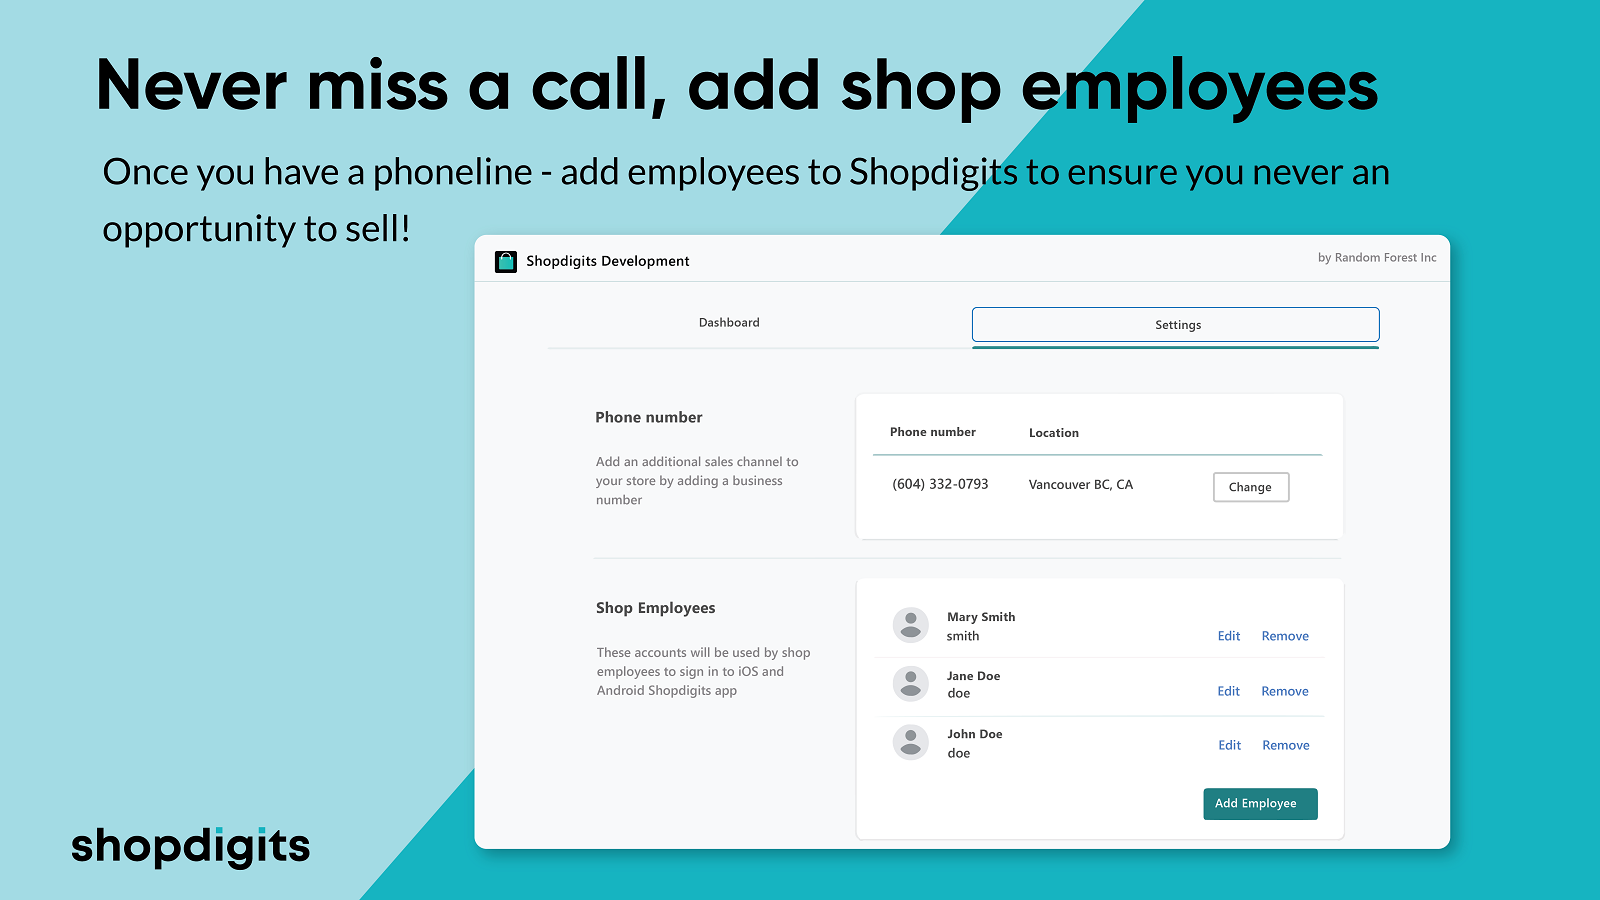 Add employees to your Shopdigits app and never miss a phone call